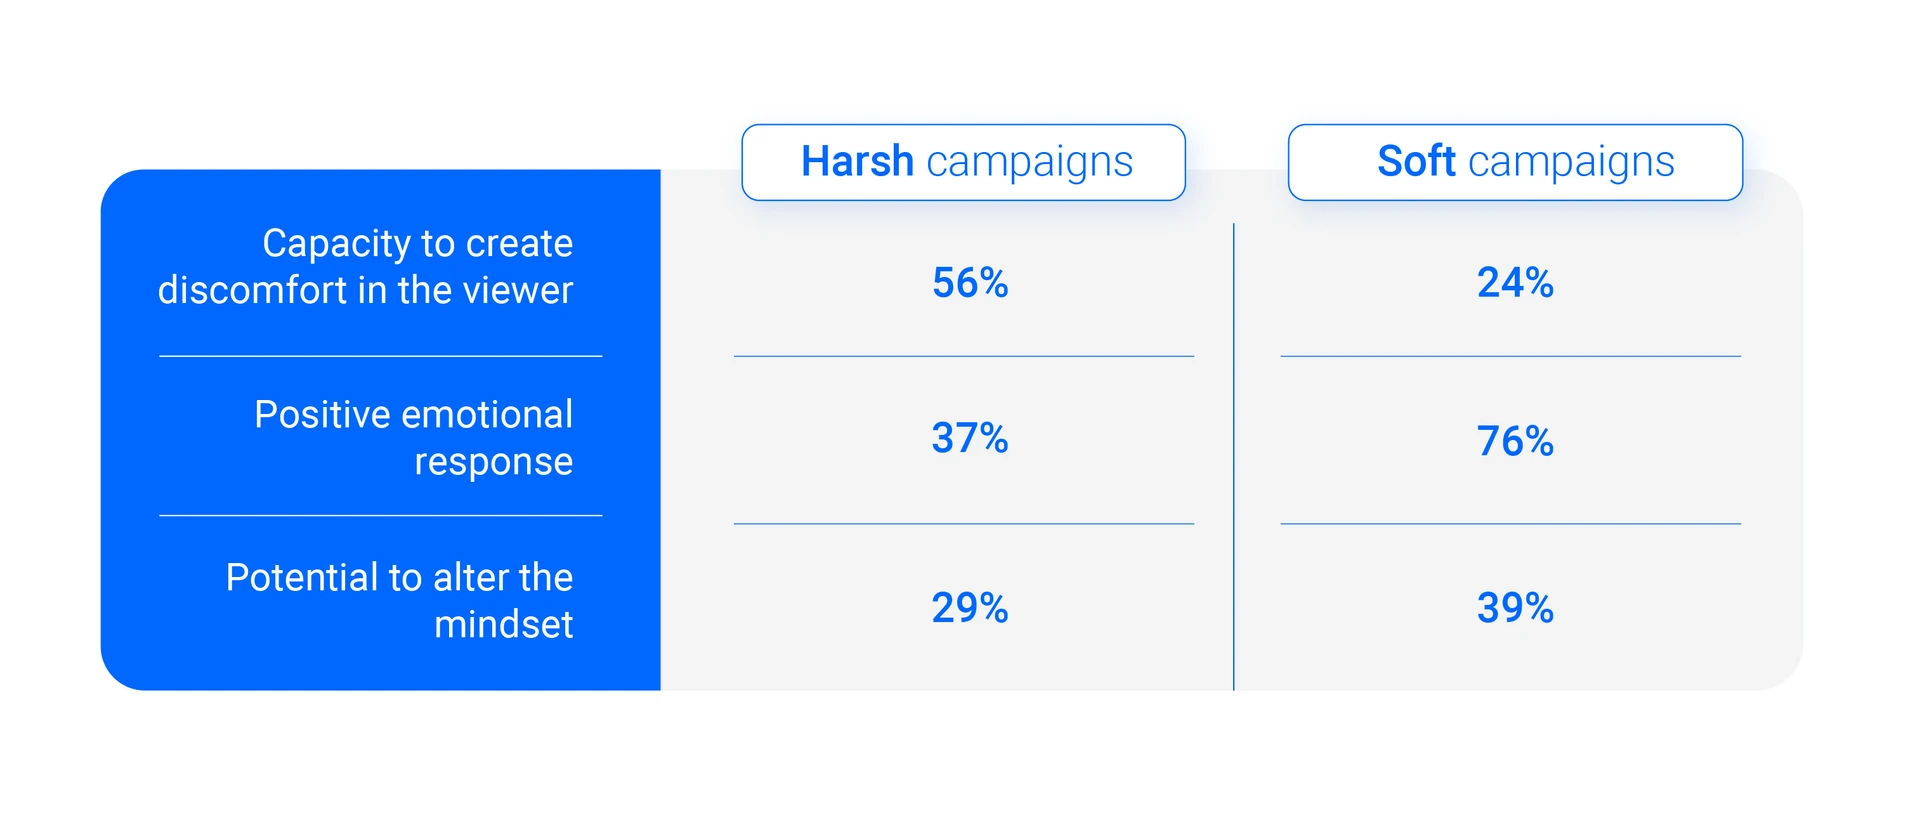 Main results of the declarative segment for hard and soft campaigns.